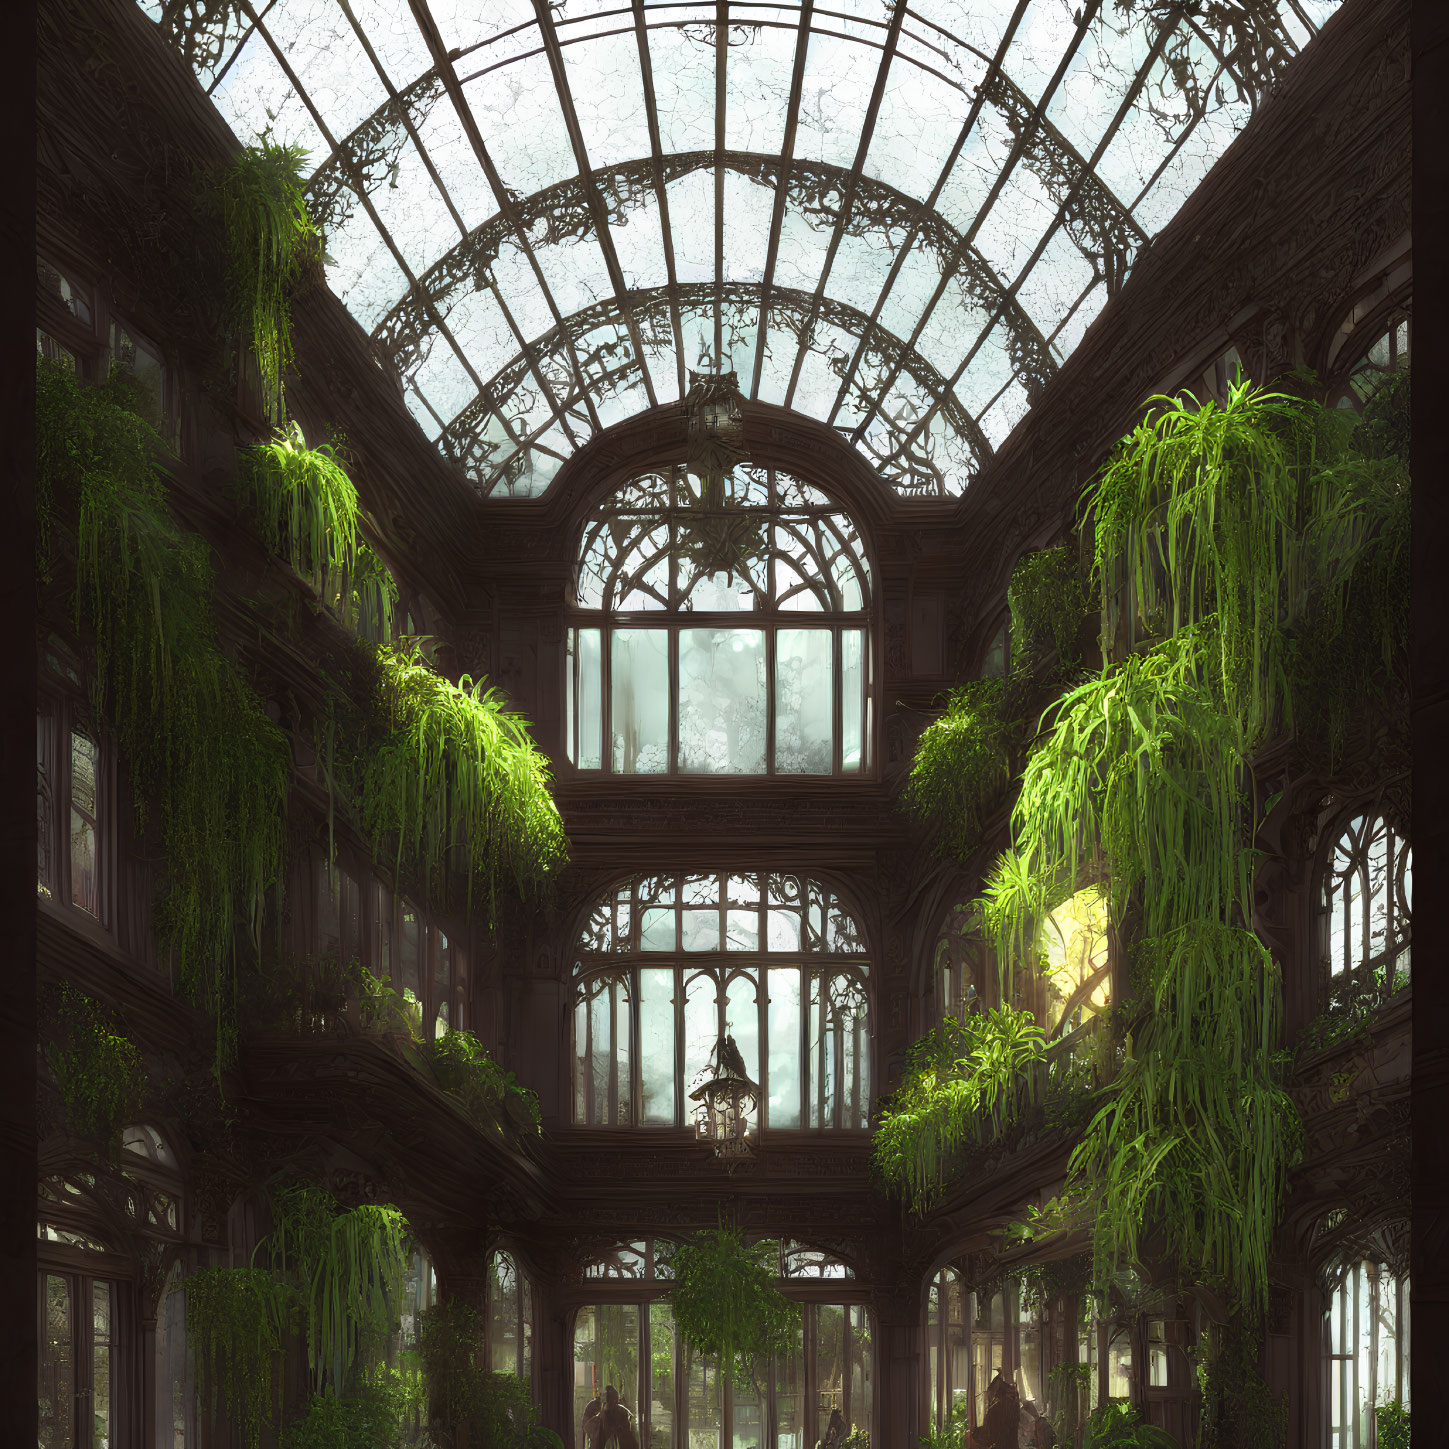 Victorian-themed greenhouse with glass ceiling and lush greenery